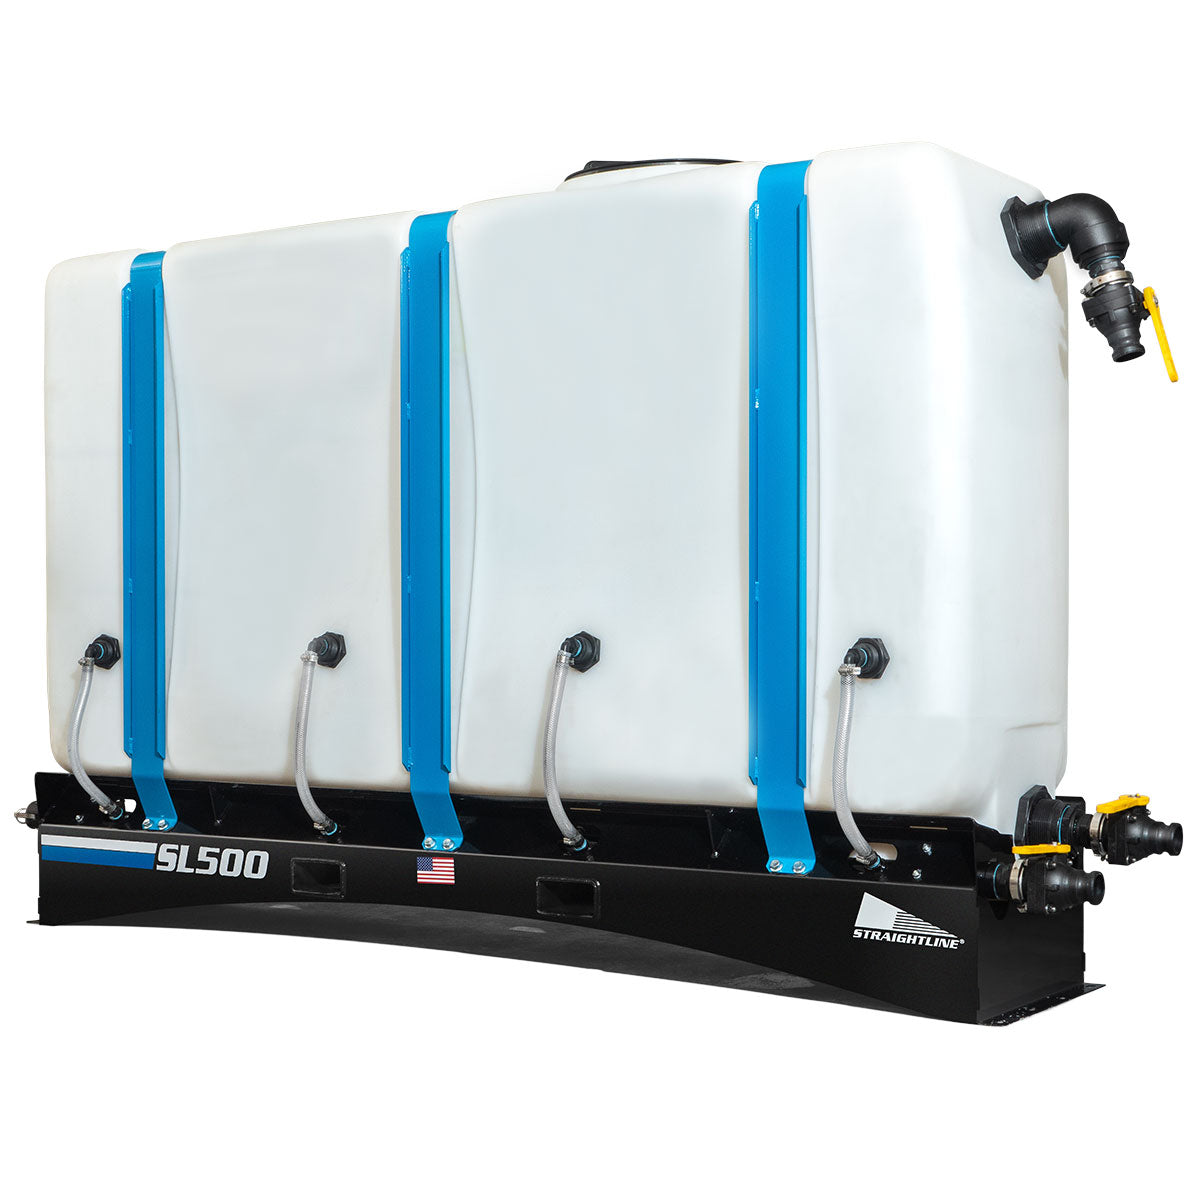 New SL500 Performix Mud Mixing System Tank for Directional Drilling